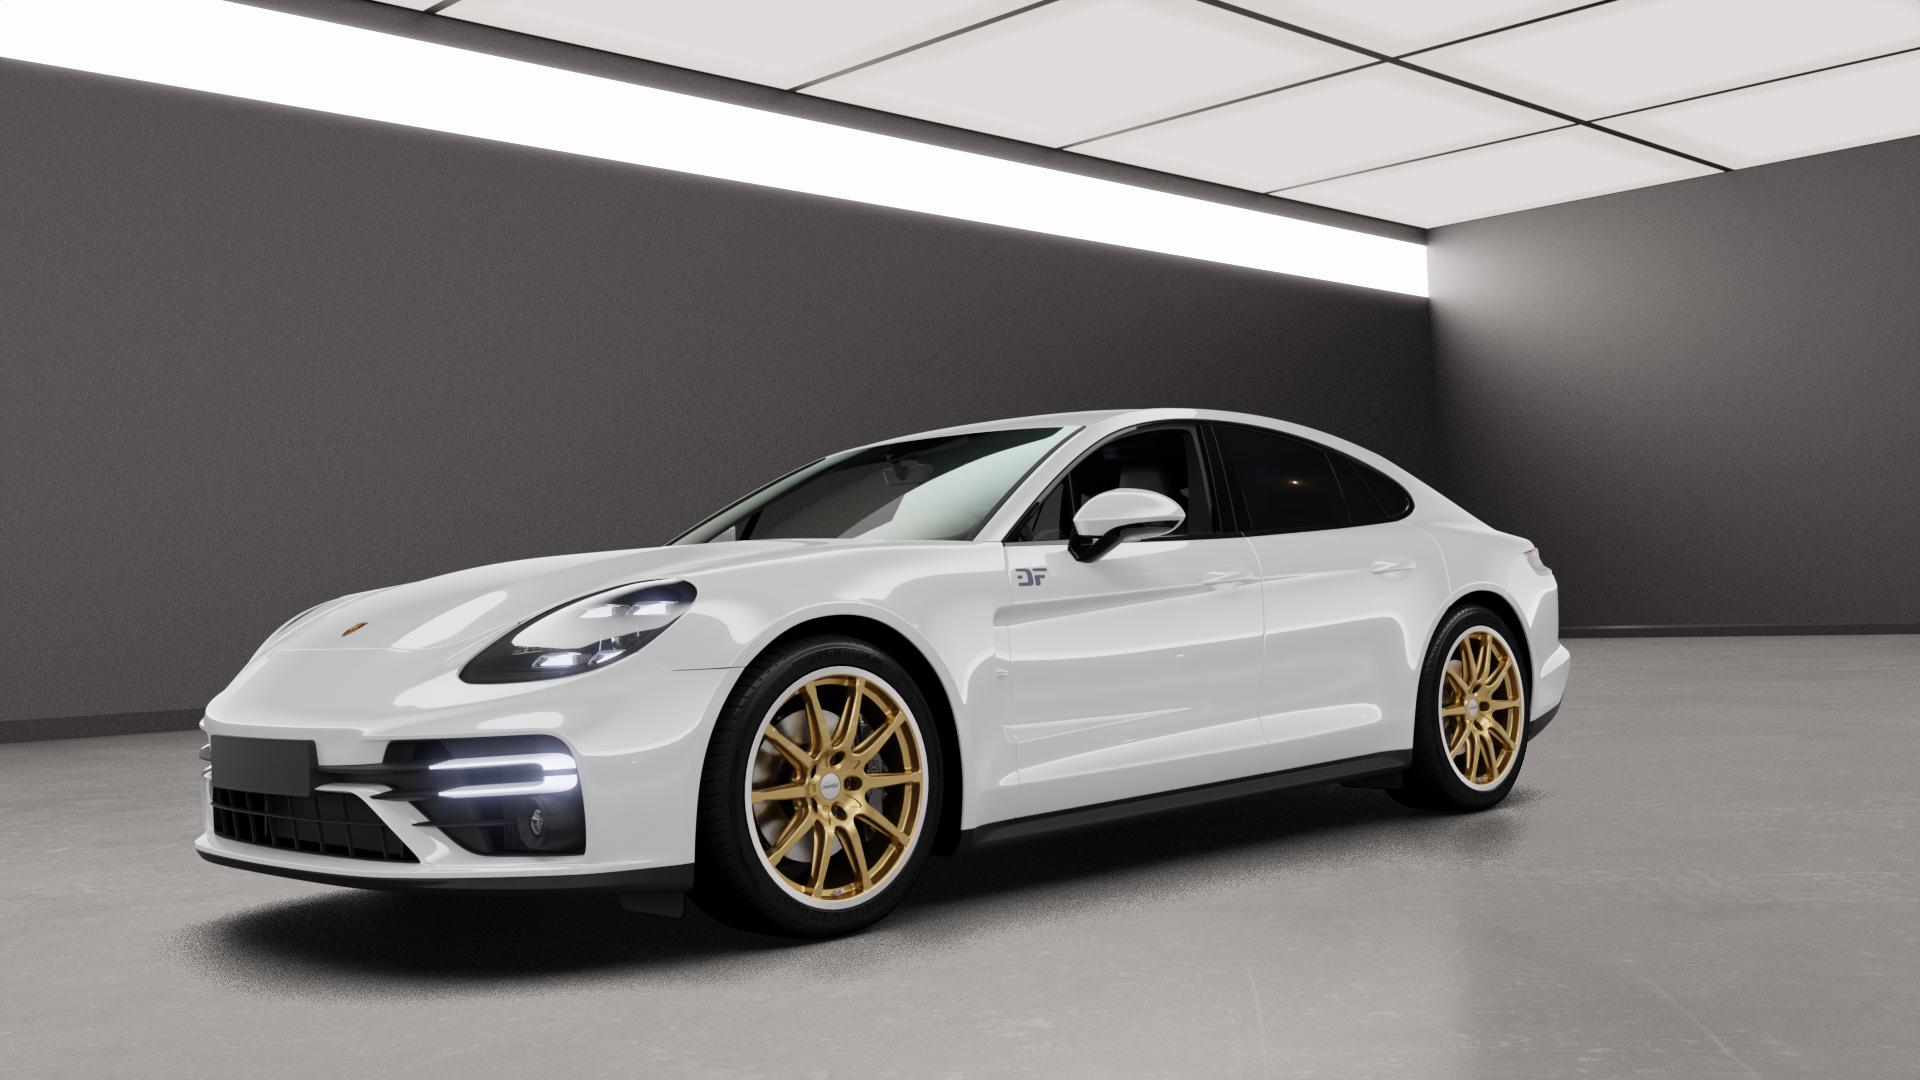 Porsche Panamera Type 971 4,0l Turbo 404kW (549 hp) Wheels and Tyre  Packages | velonity.com